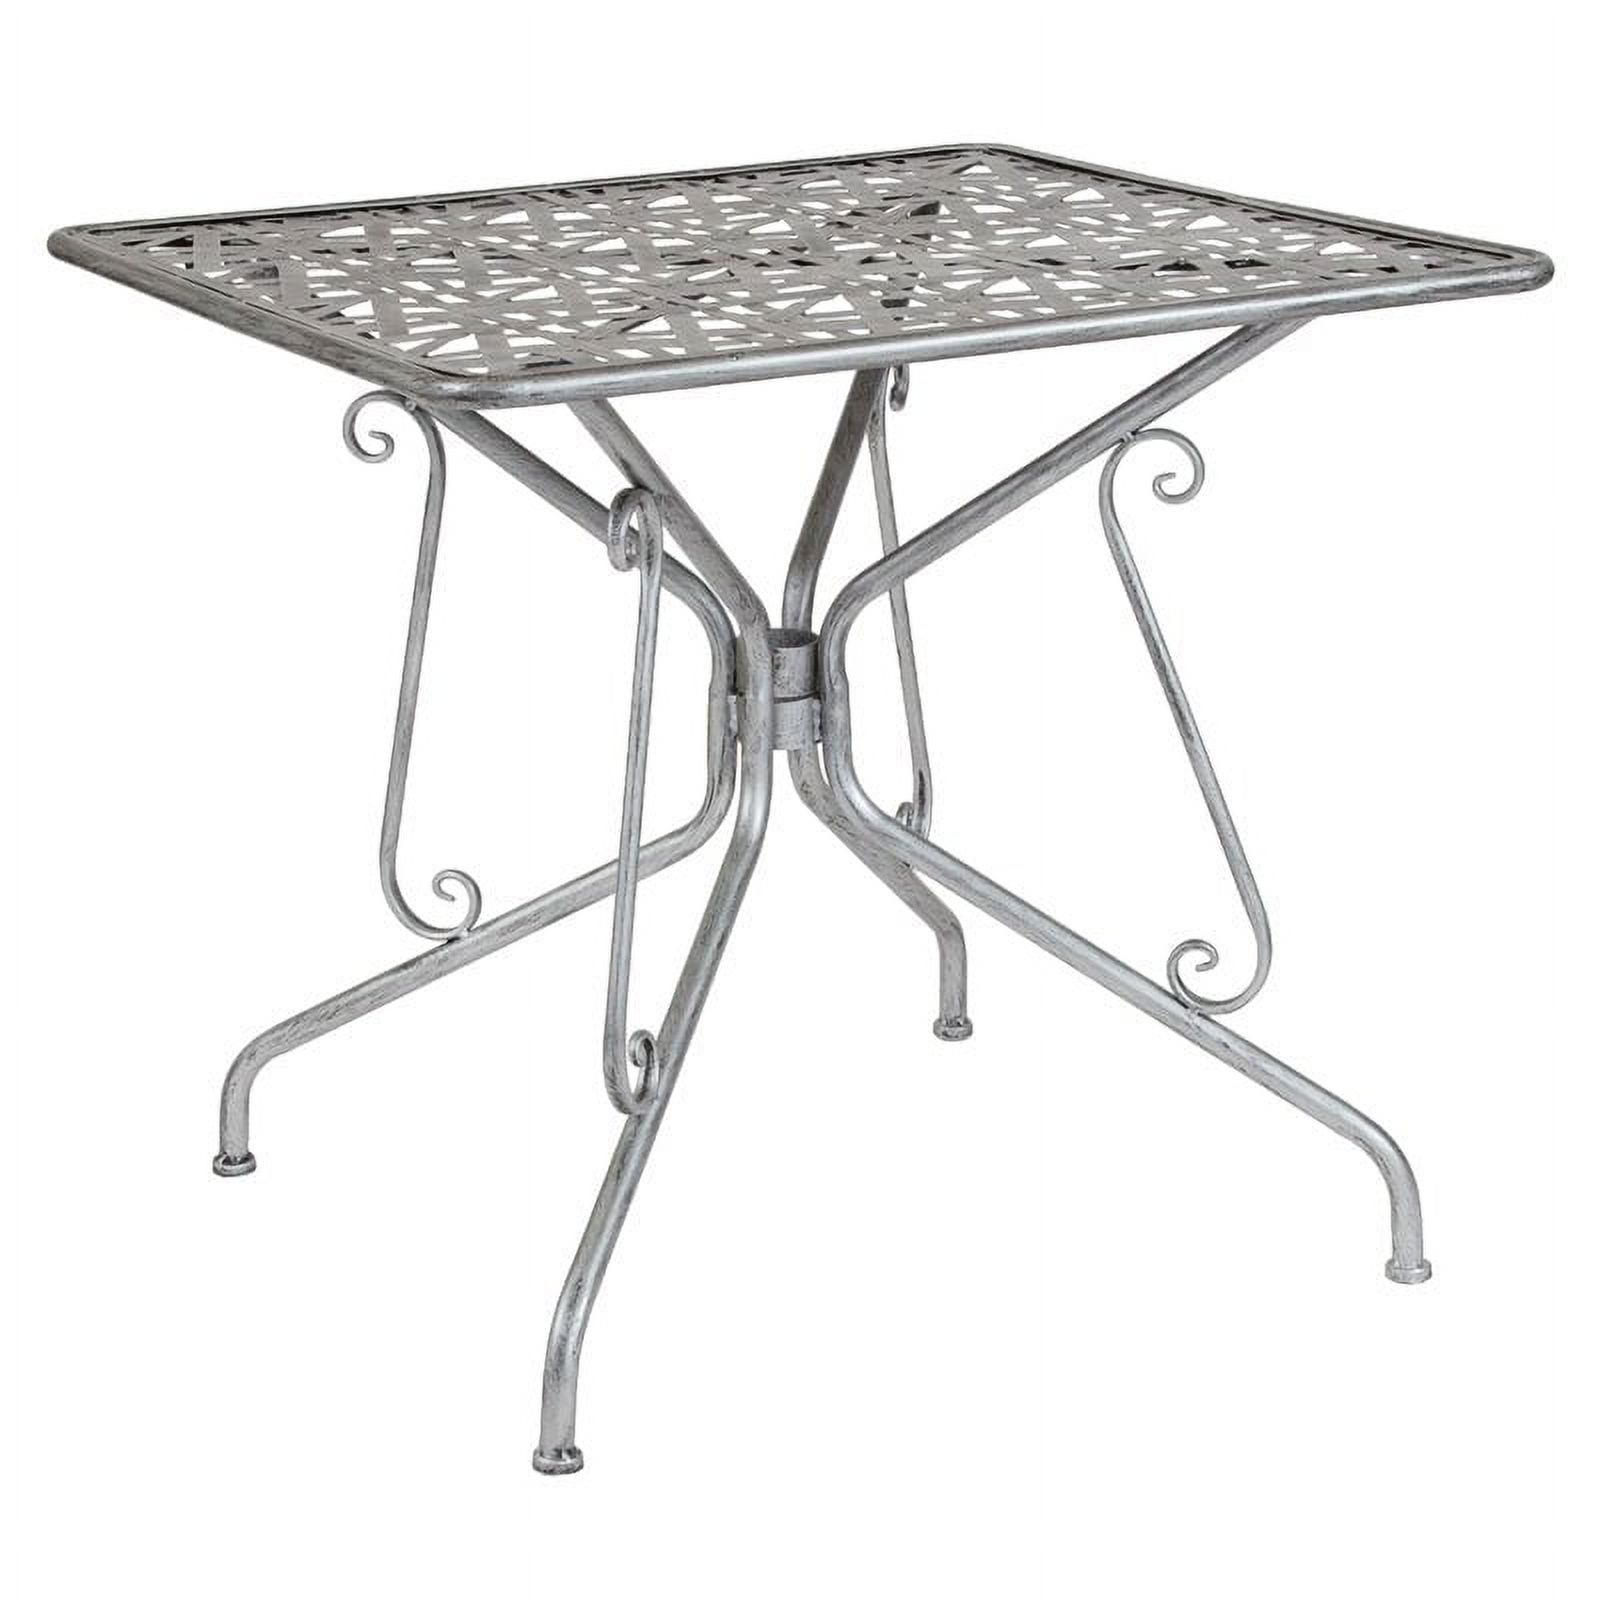 Flash Furniture Agostina Series 31.5" Square Antique Silver Indoor-Outdoor Steel Patio Table with 2 Stack Chairs - image 3 of 4